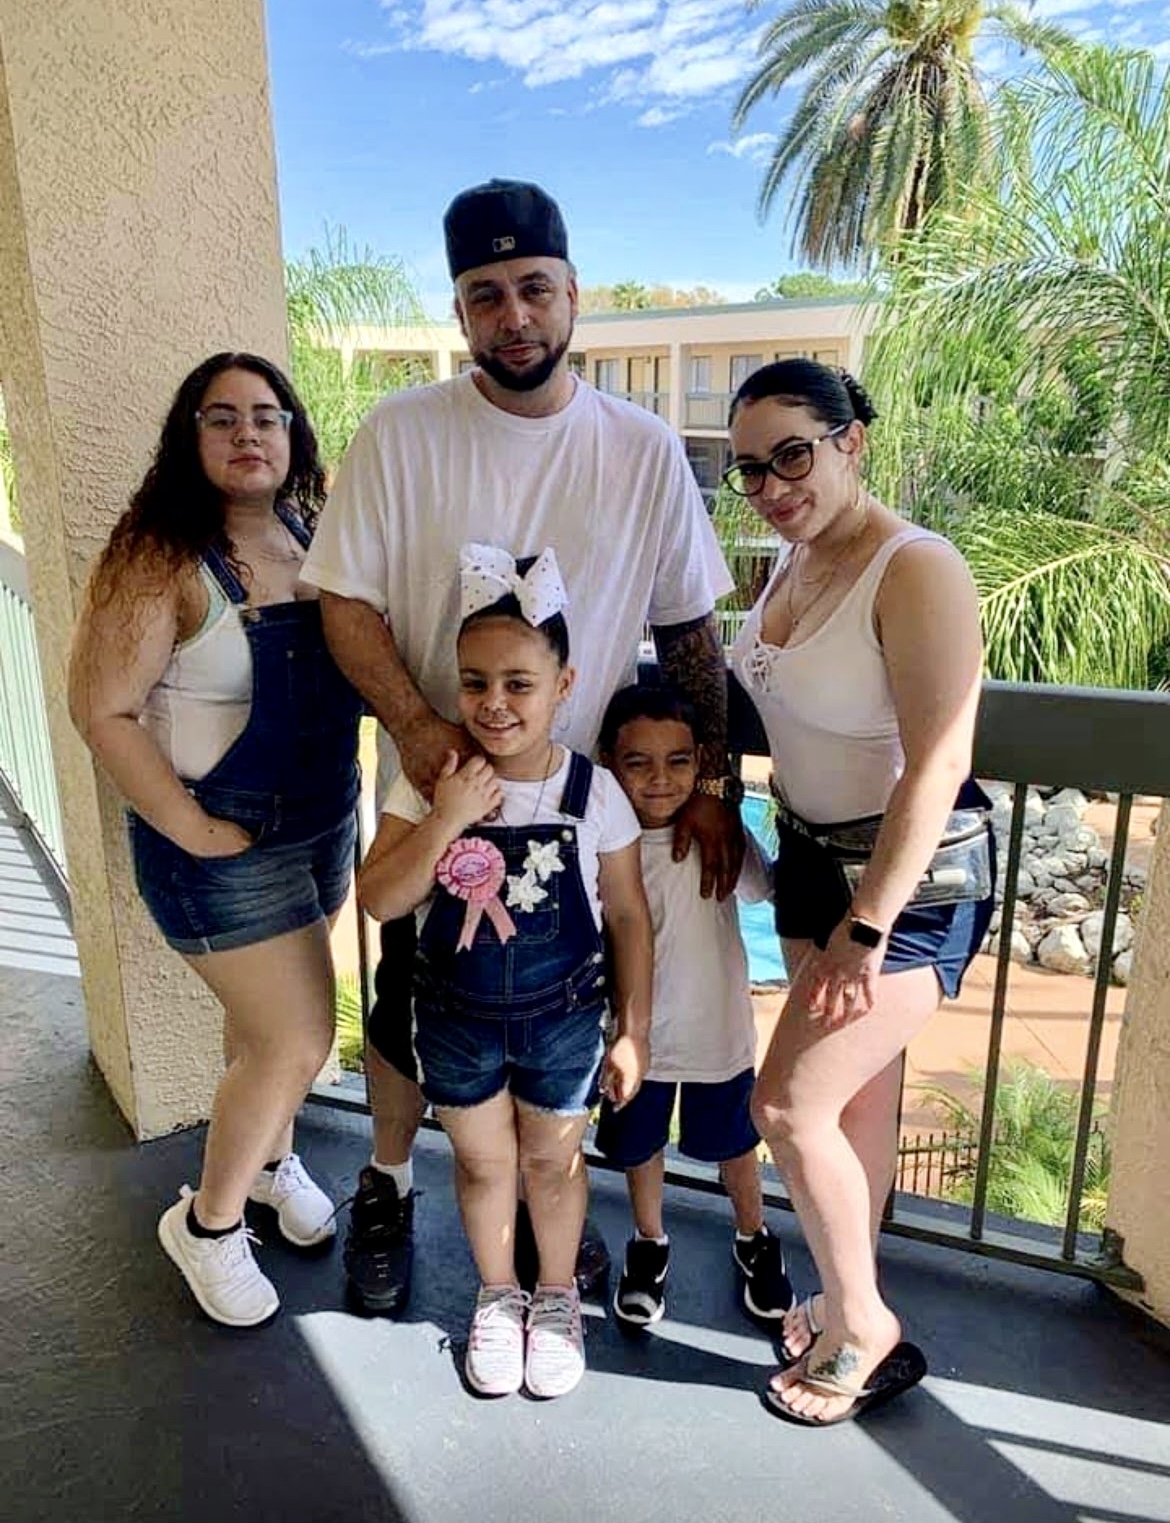 Jason raised 4 amazing children. He was an amazing father and friend. His two little ones are forever going to feel this heartbreak. Rest in Paradise to you ex husband.  I’ll forever keep your memory alive.